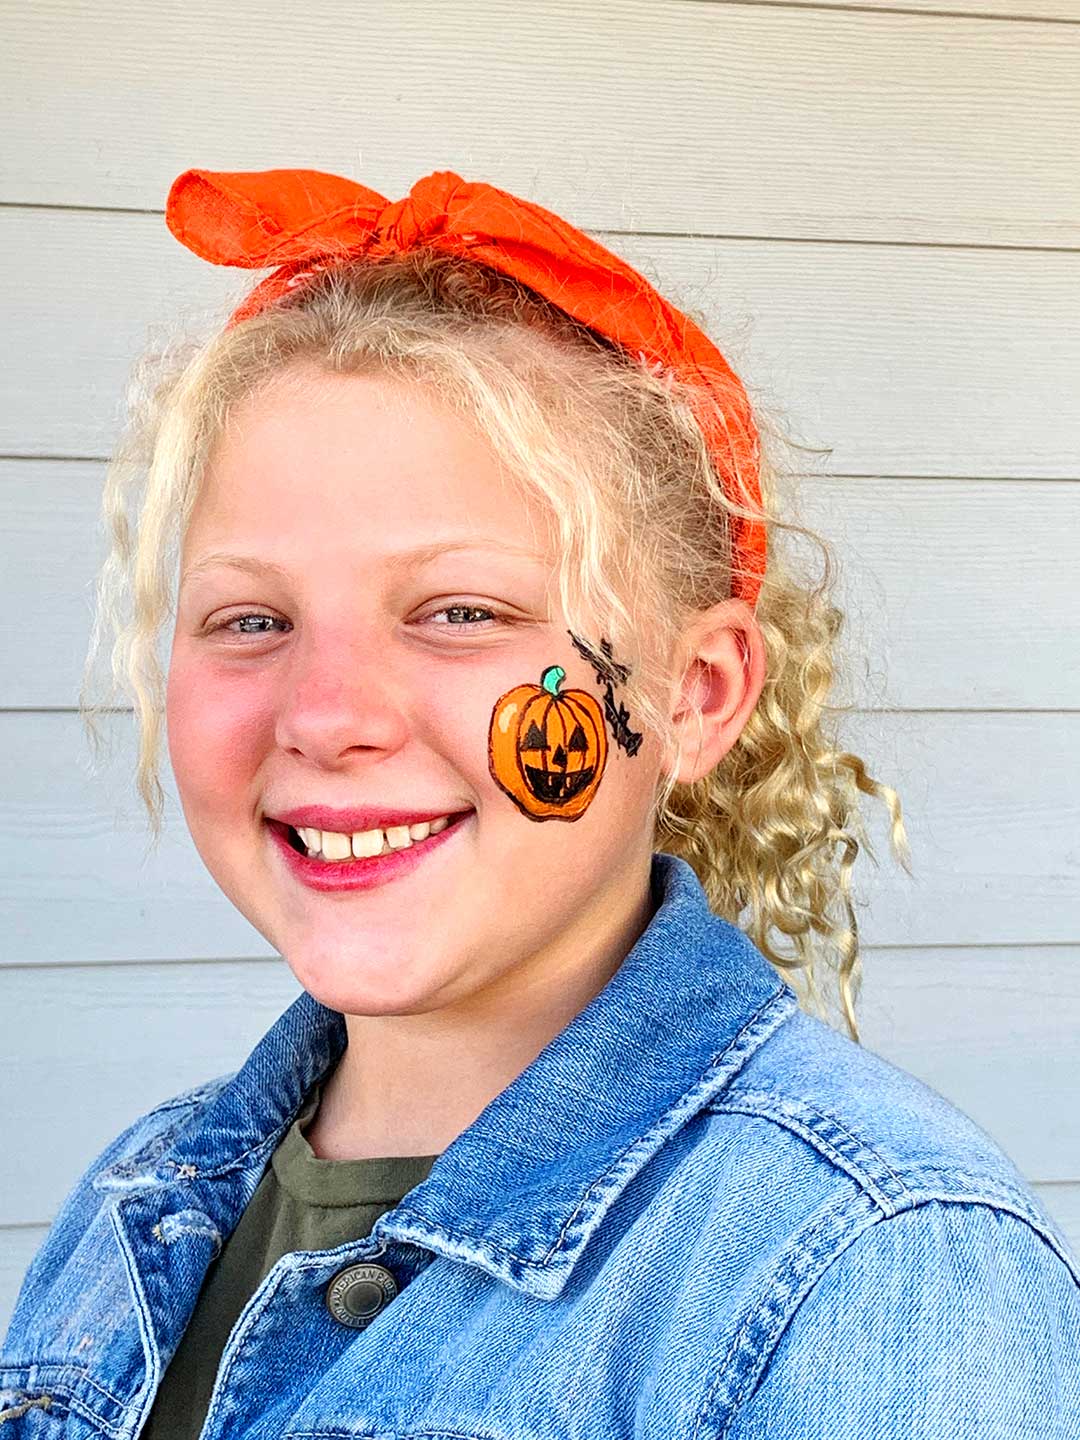 Girl with blonde curly hair smiling at camera with jack-o-lantern pumpkin face painting on cheek.